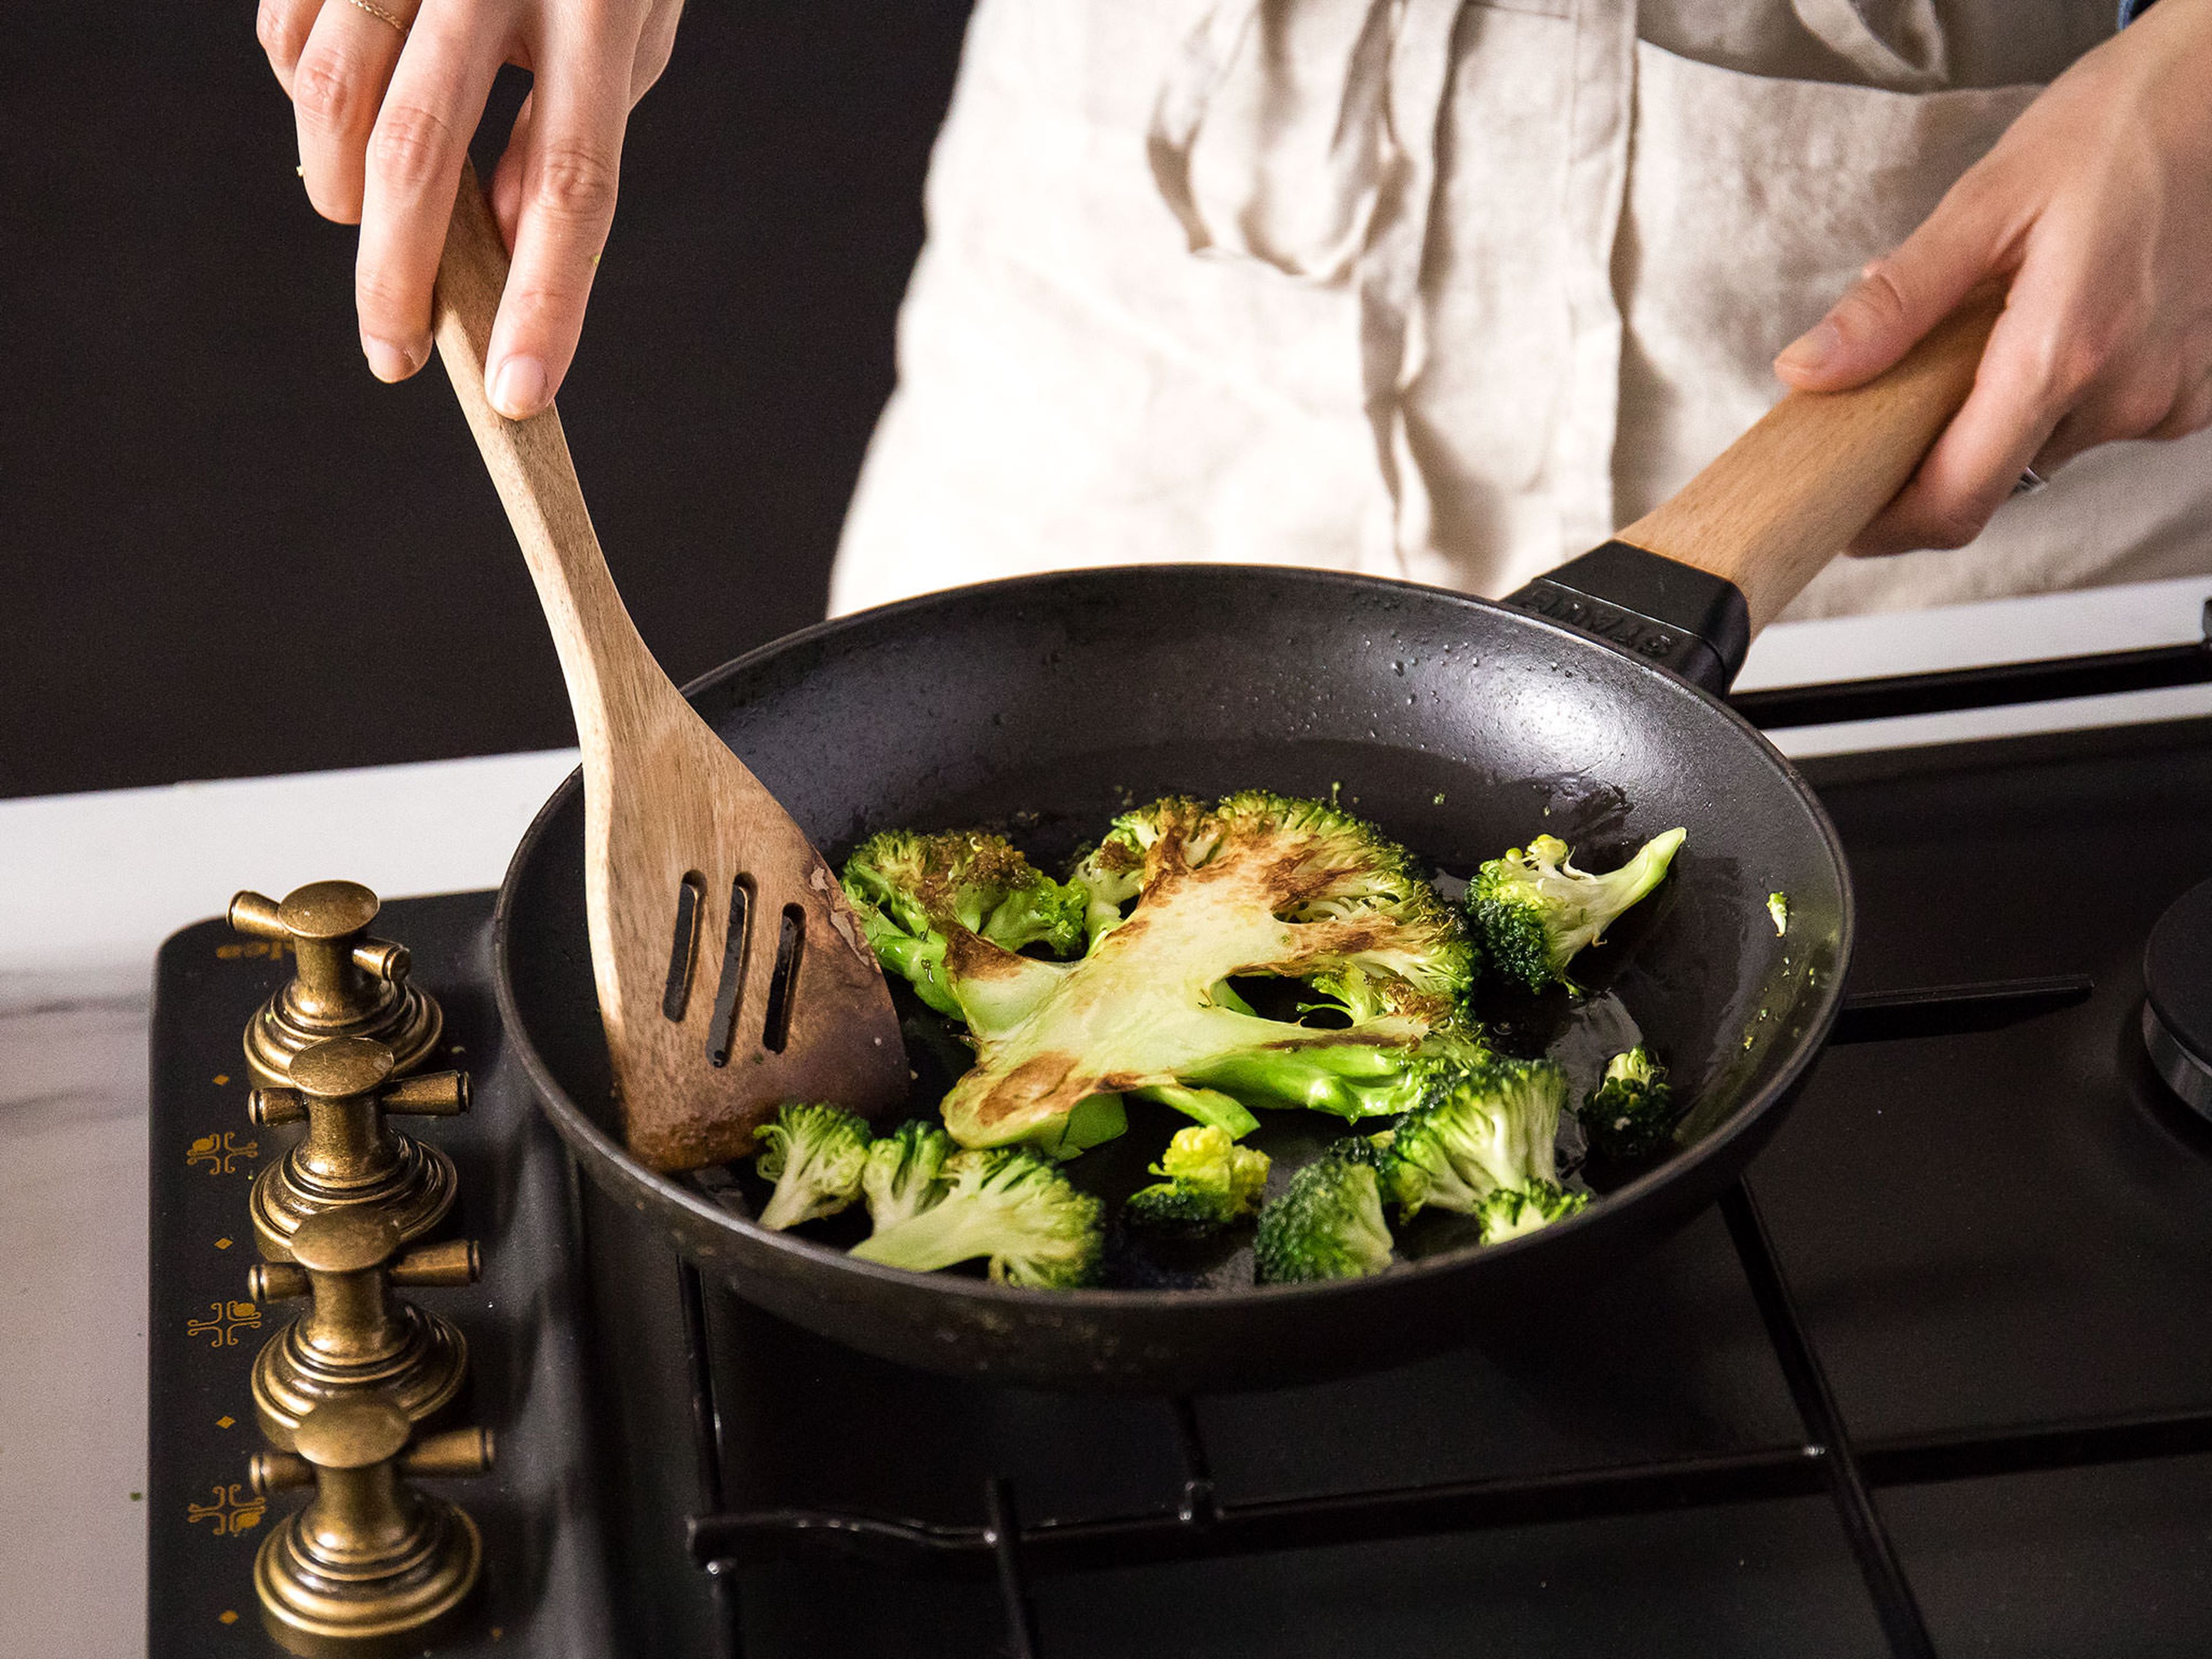 Heat the same frying pan used to toast the hazelnuts over medium-high heat, add olive oil, and lay in the sliced broccoli cut-side down. Cook on each side for about 1 - 2 min. or until browned.